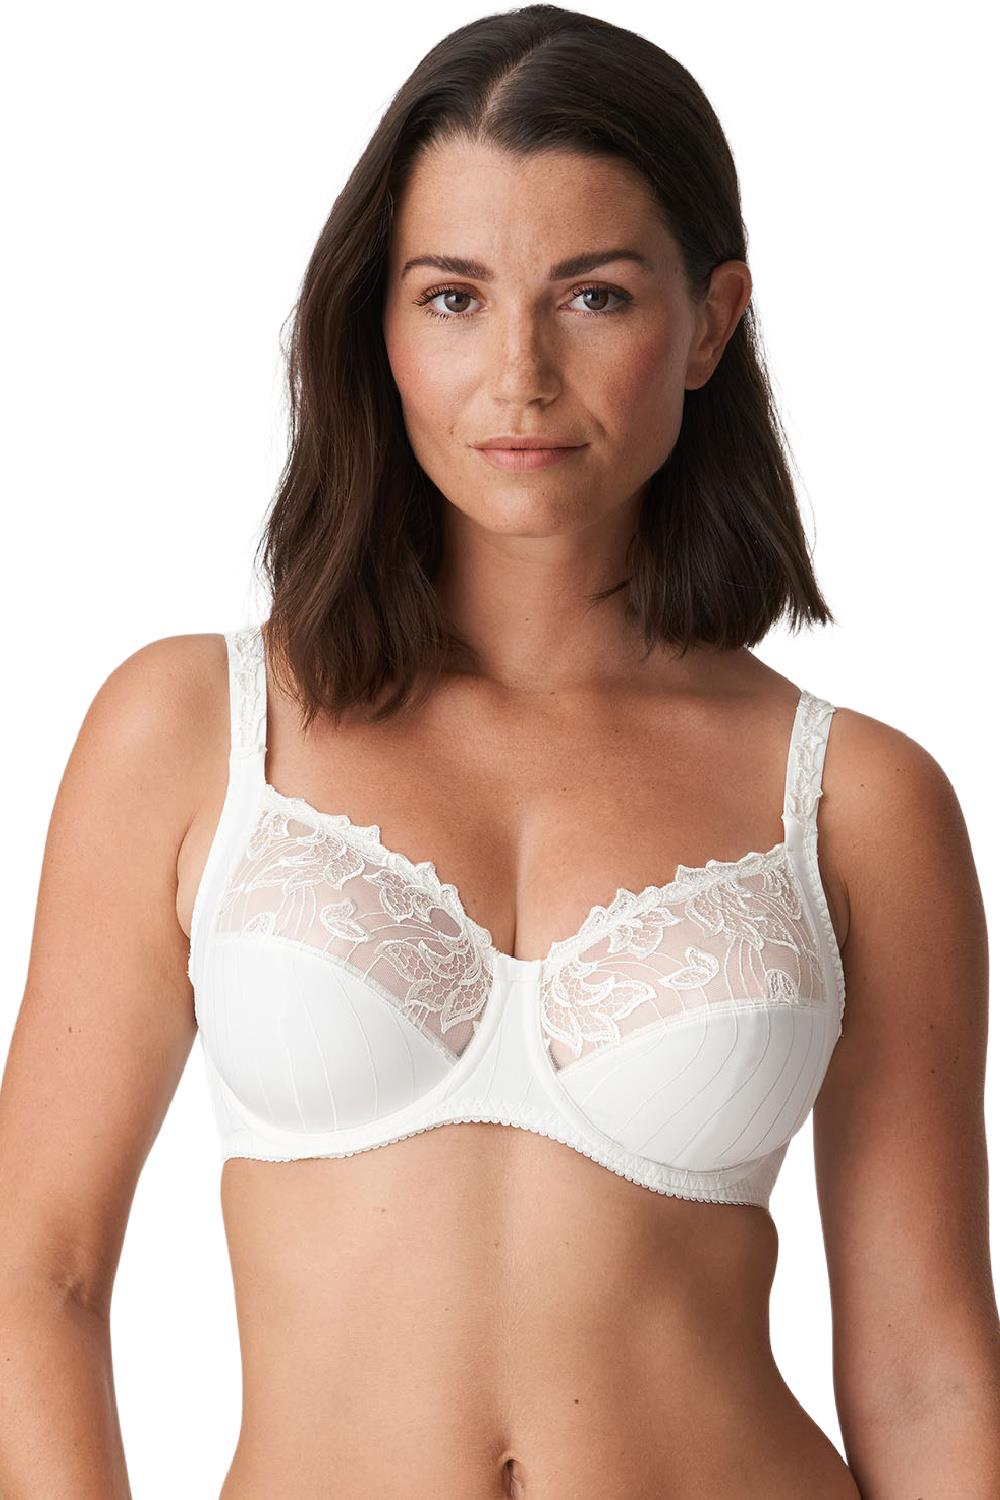 Deauville Full Cup Wire Bra (Cup-I,J,K) 0161815 – My Top Drawer